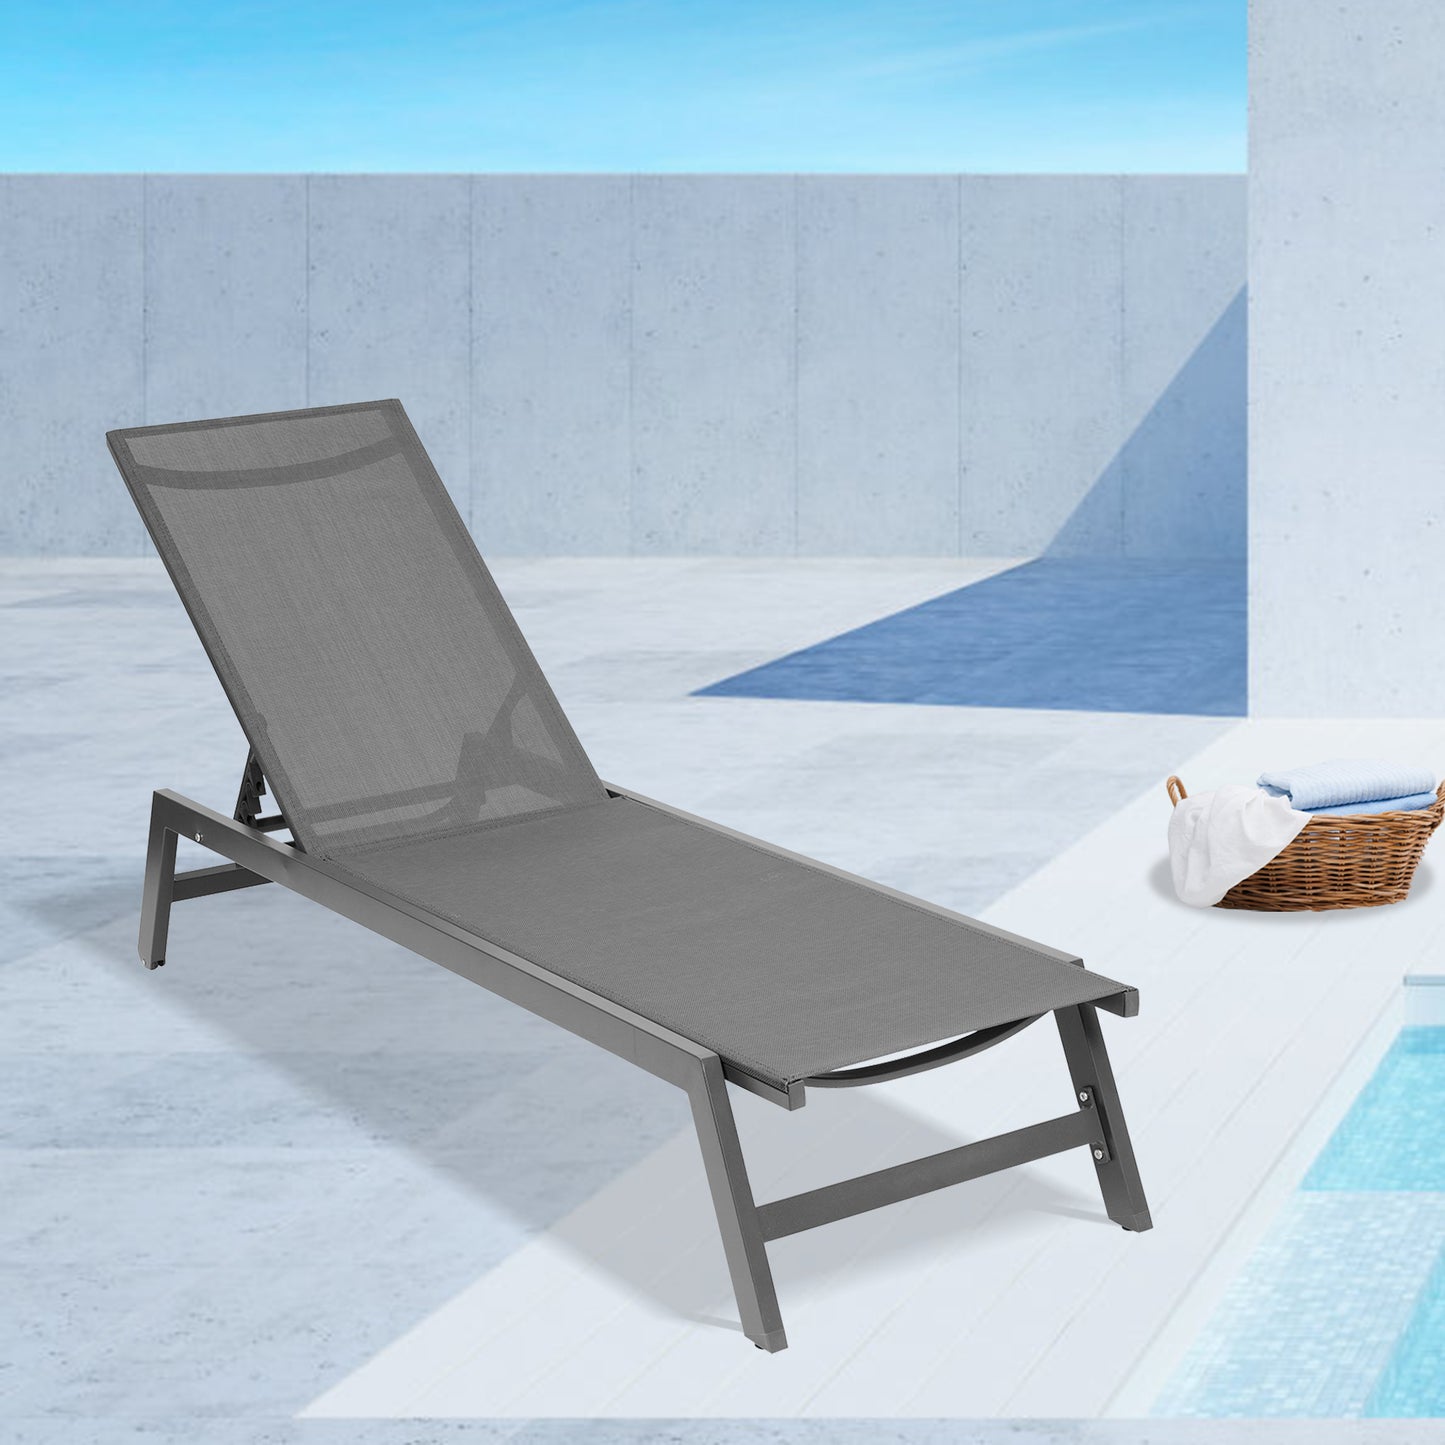 Outdoor Chaise Lounge Chair, Five-Position Adjustable Aluminum Recliner, All Weather for Patio,Beach,Yard, Pool(Grey Frame/Dark Grey Fabric)